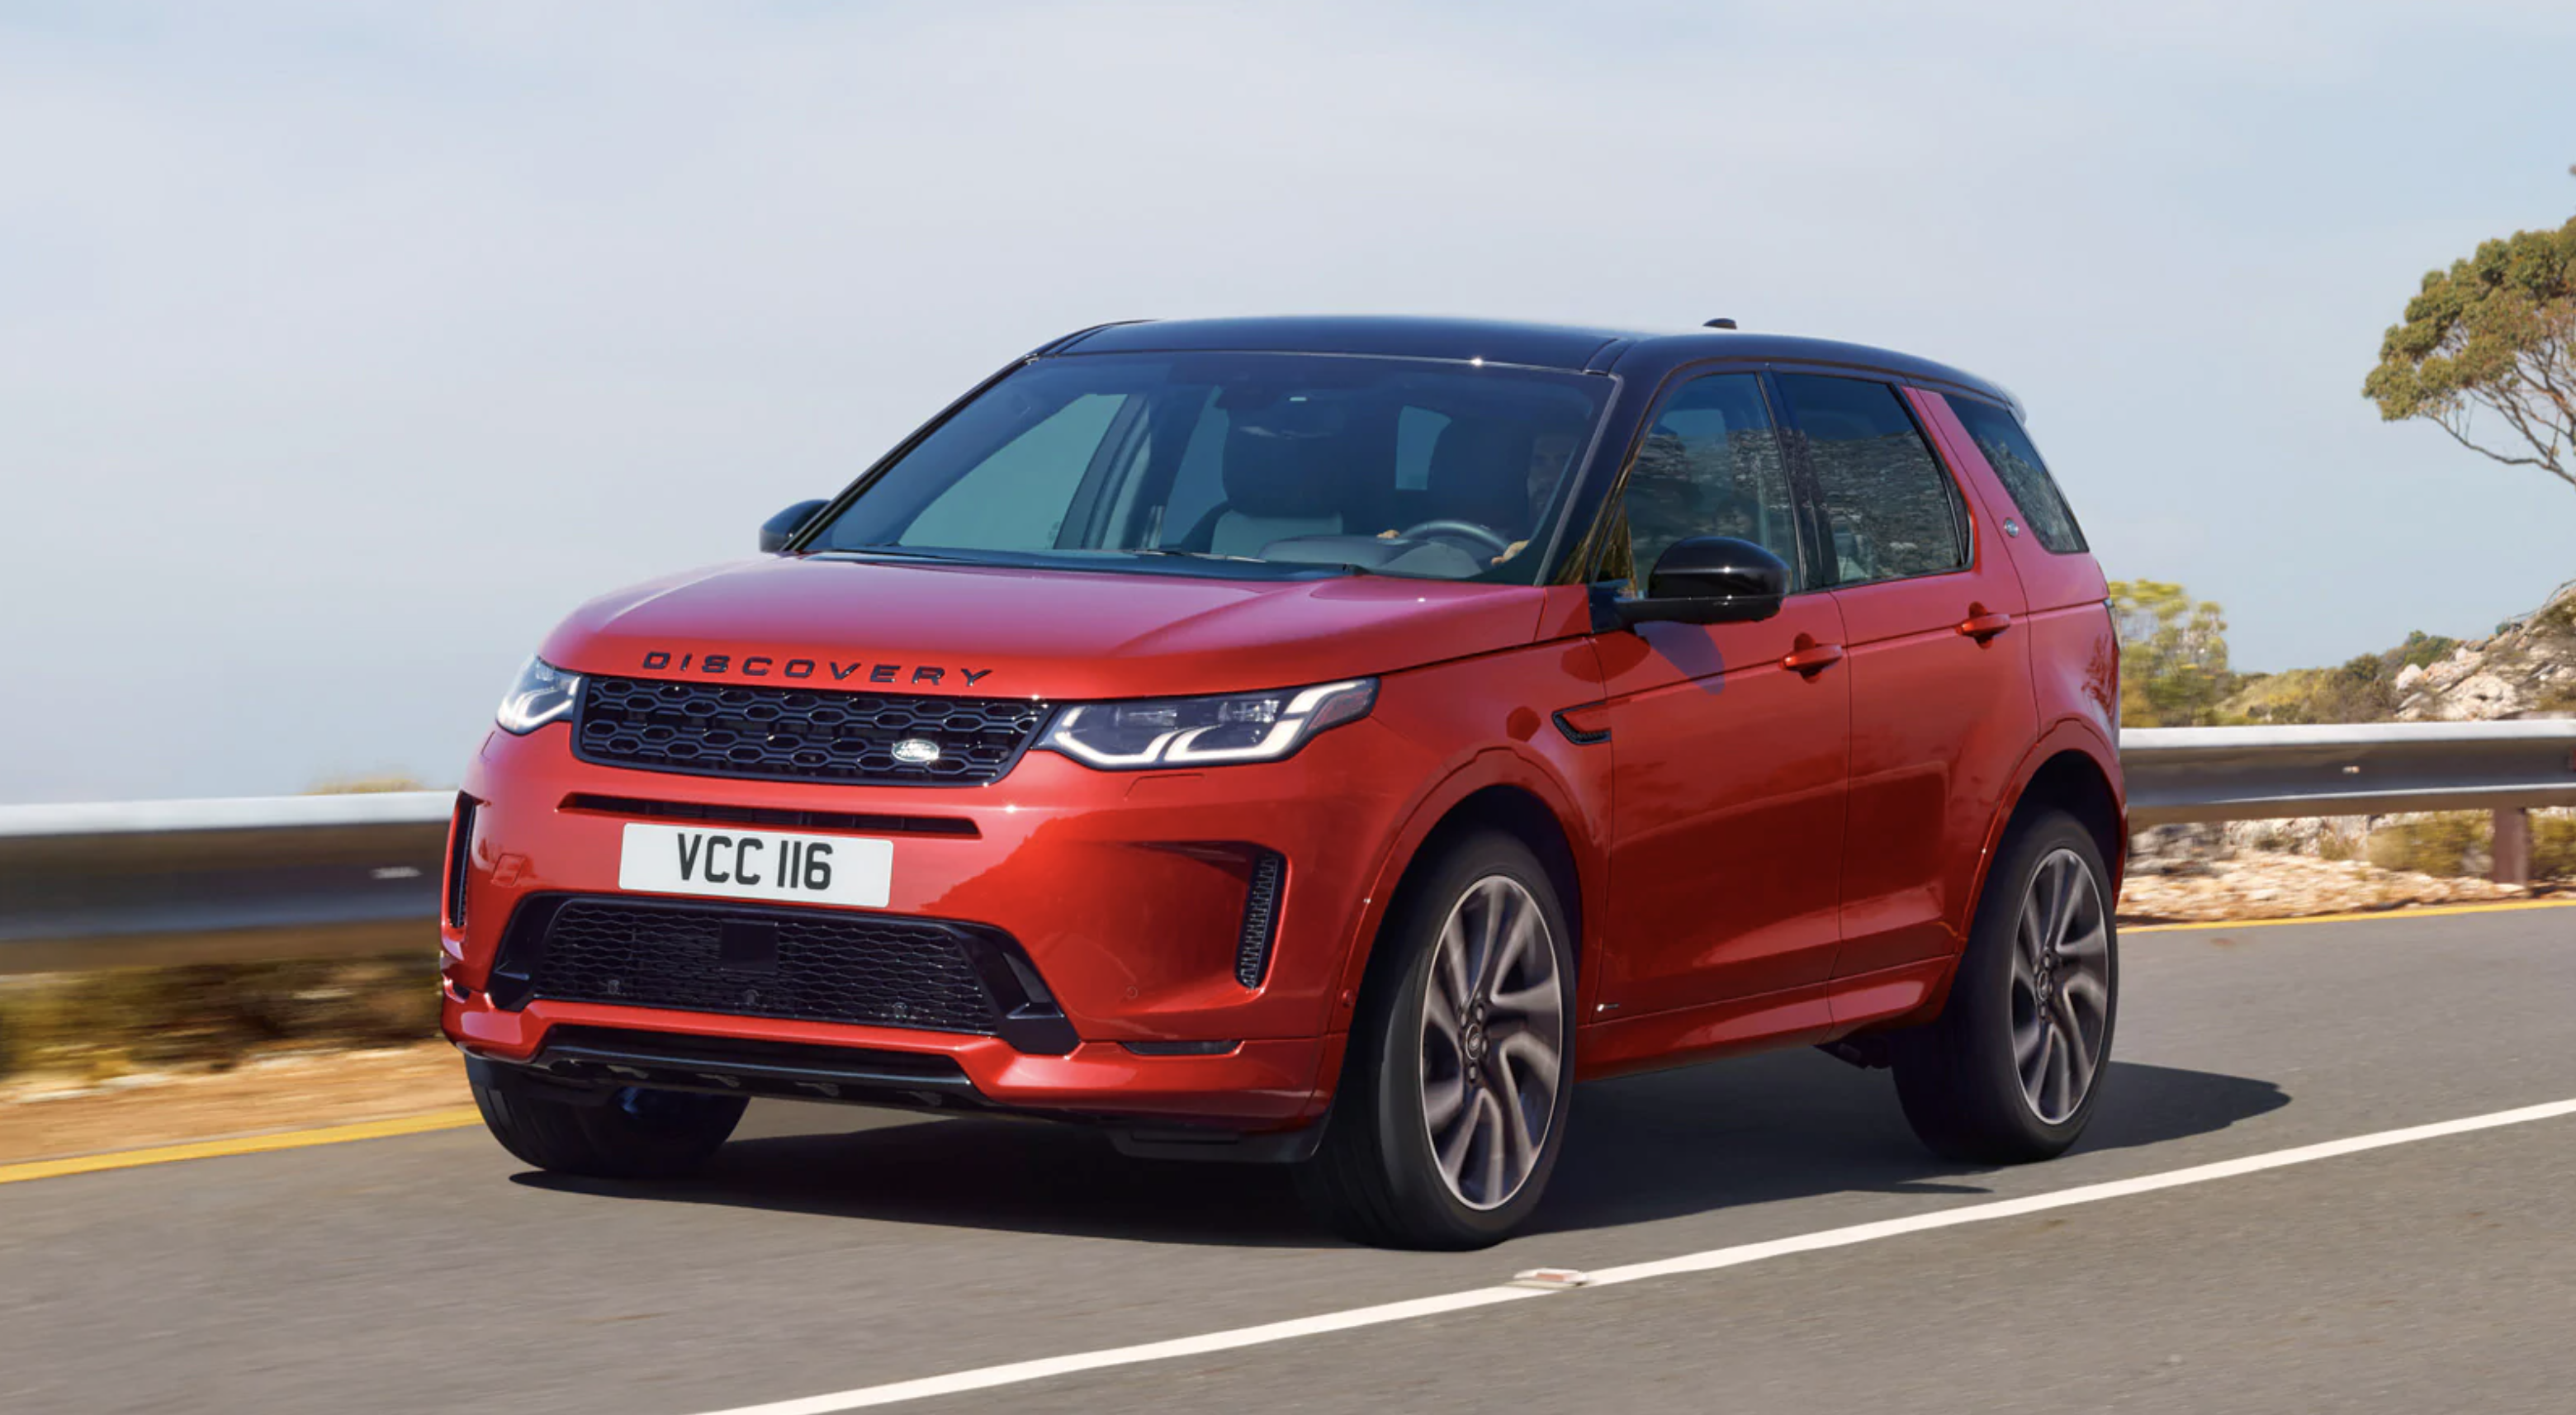 2020 Land Rover Range Rover Sport Review  Price, specs, features and  photos - Autoblog